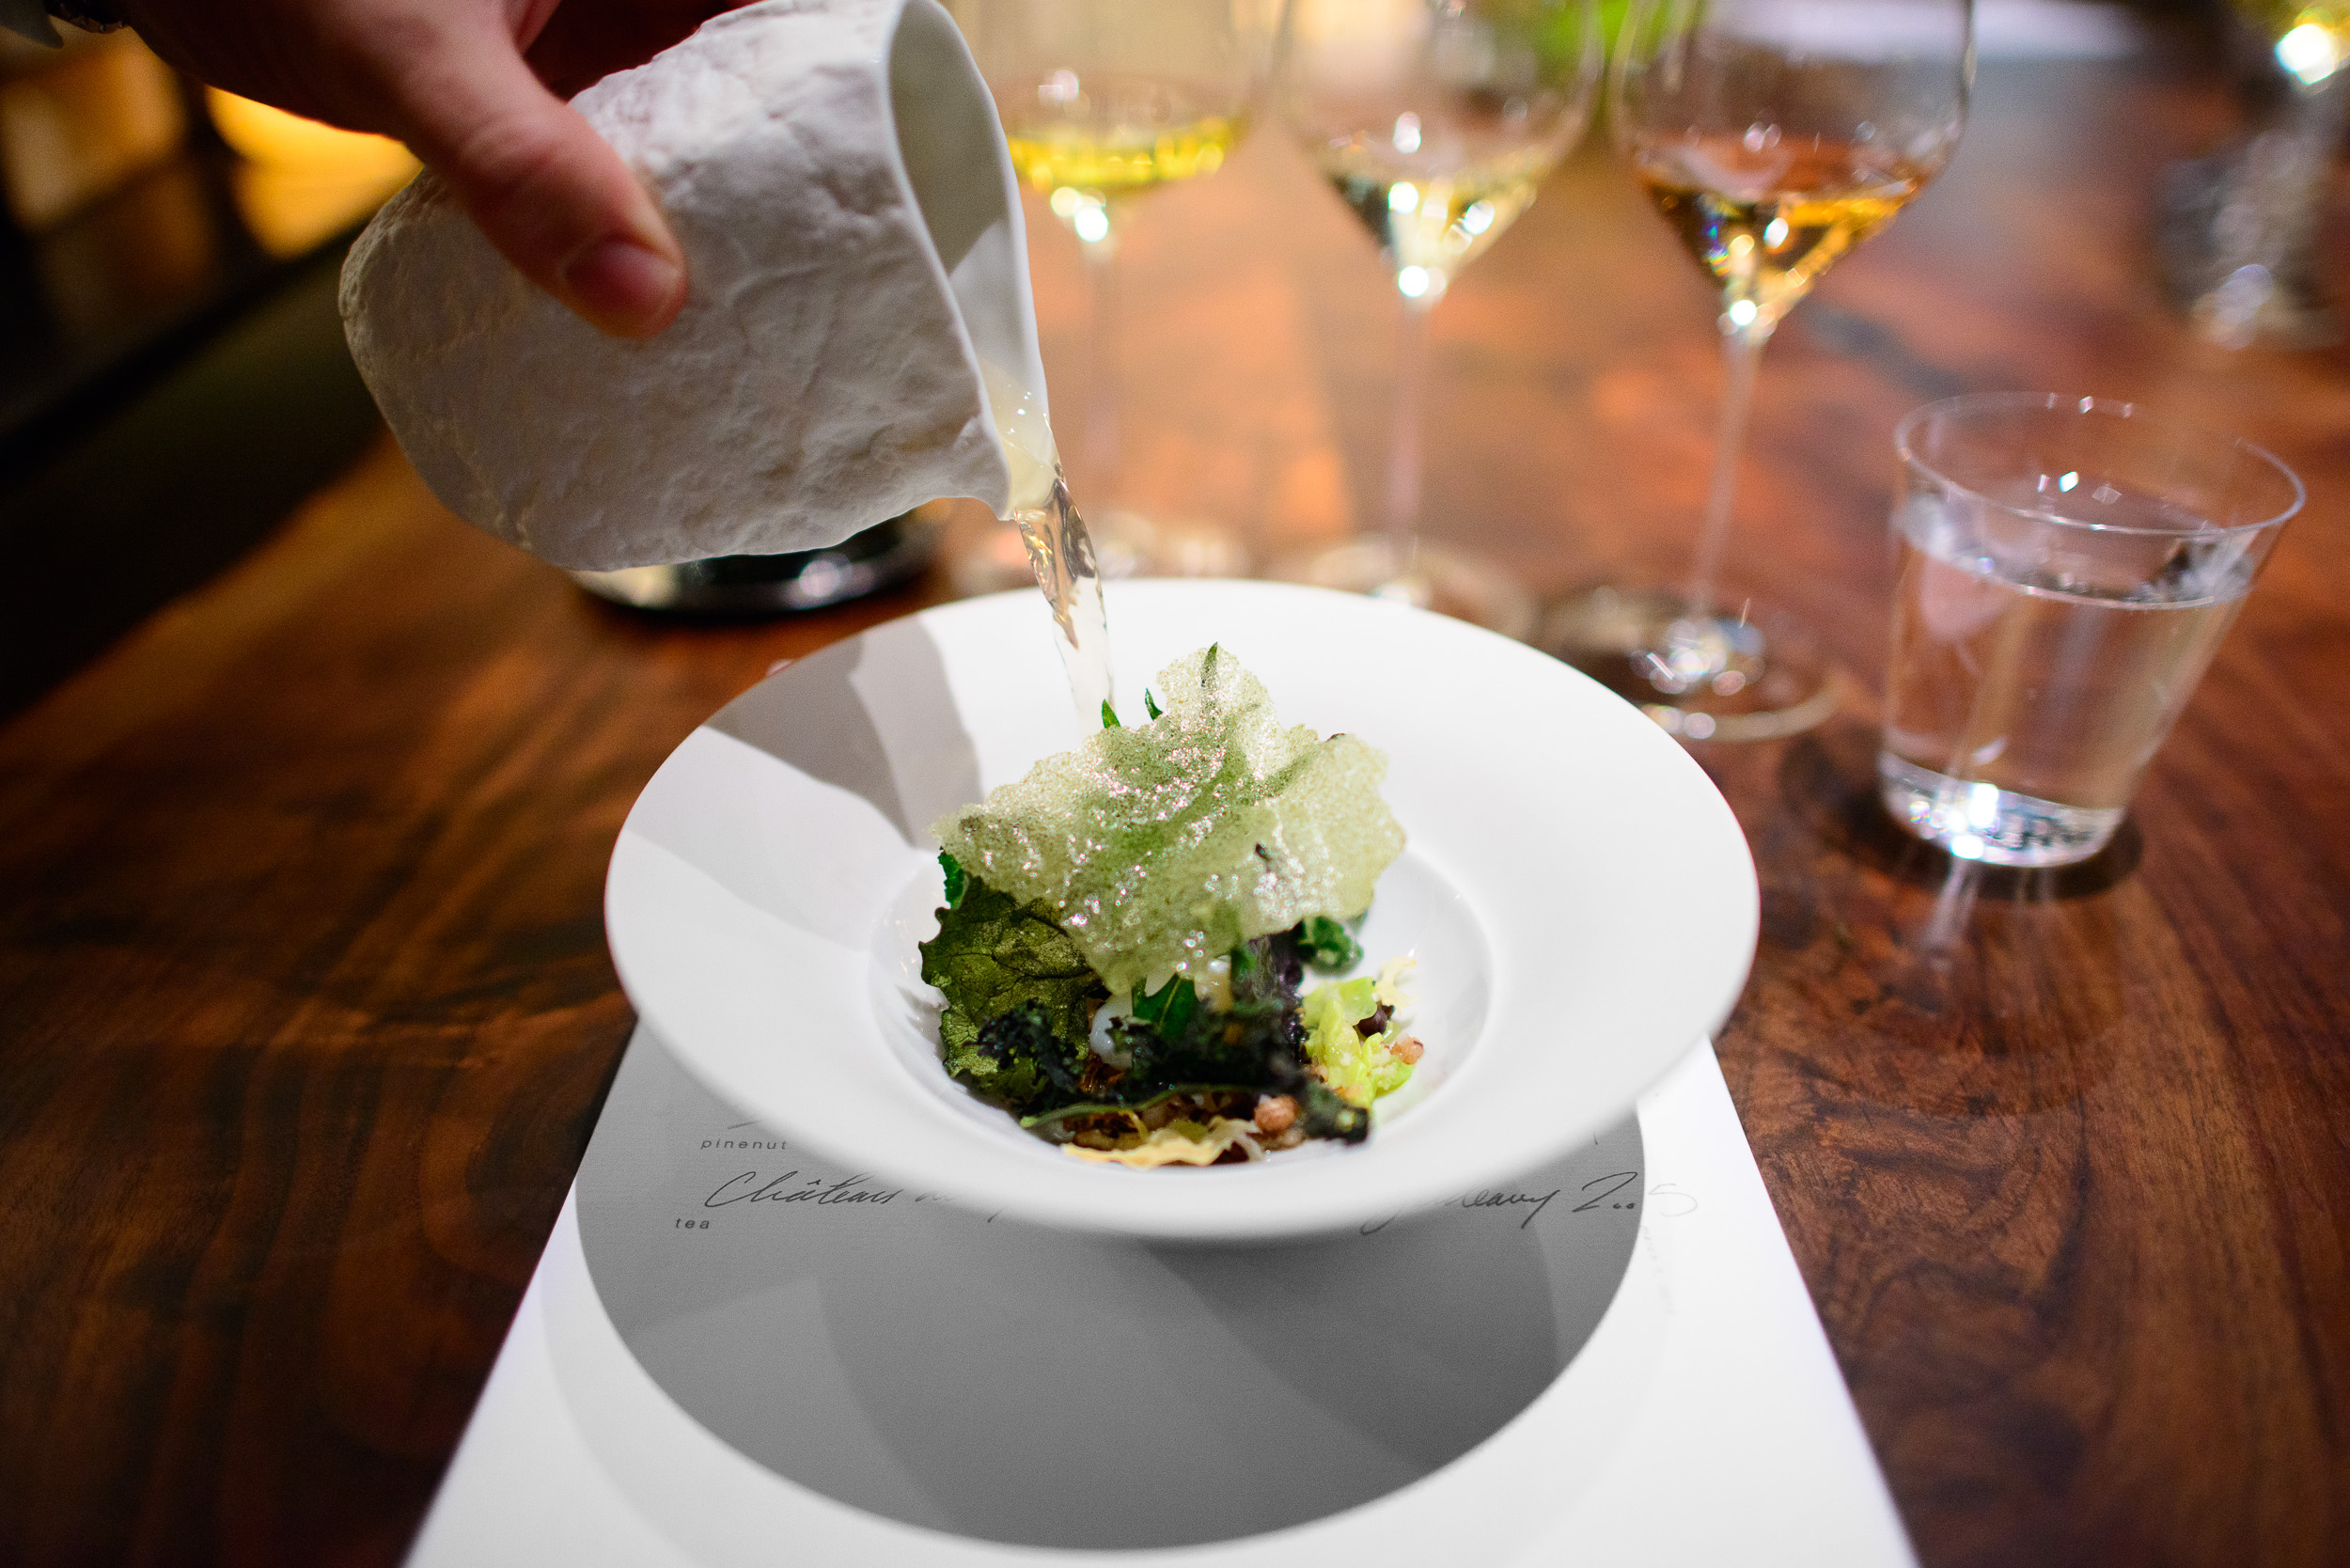 12th Course: Brassicas, each leaf dehydrated over the embers, wi